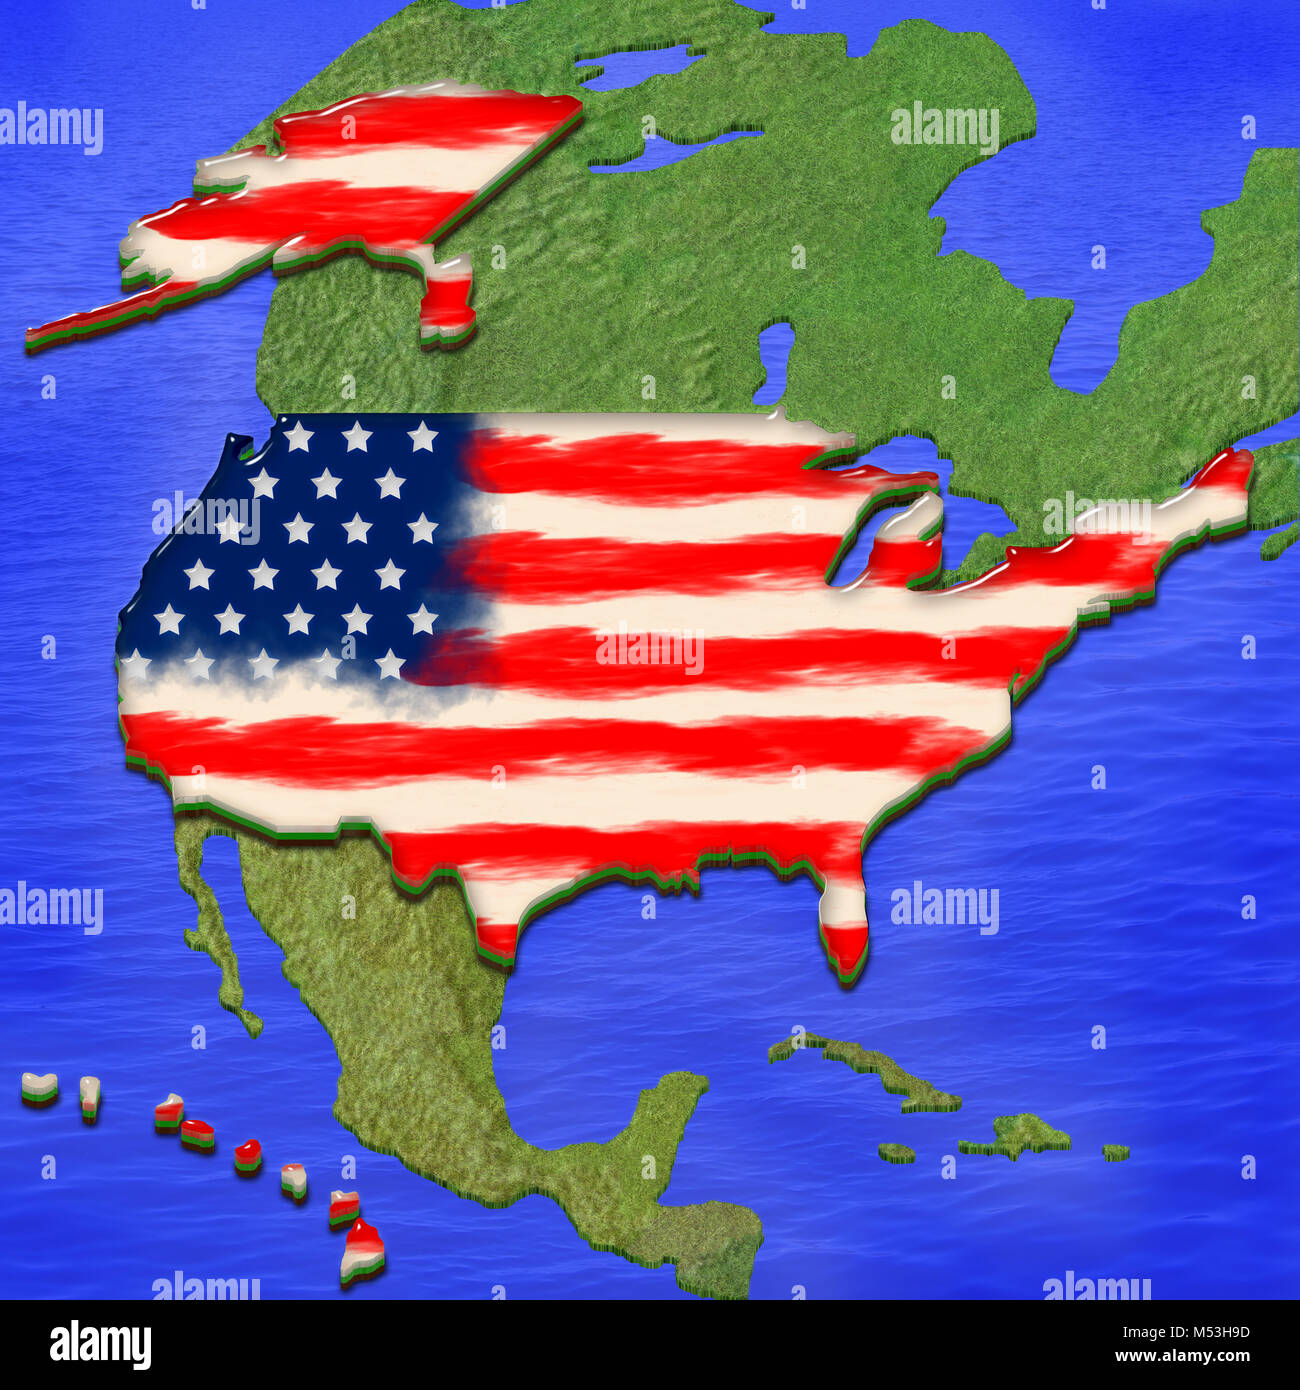 3D map of USA painted in the colors of USA flag, surrounded by